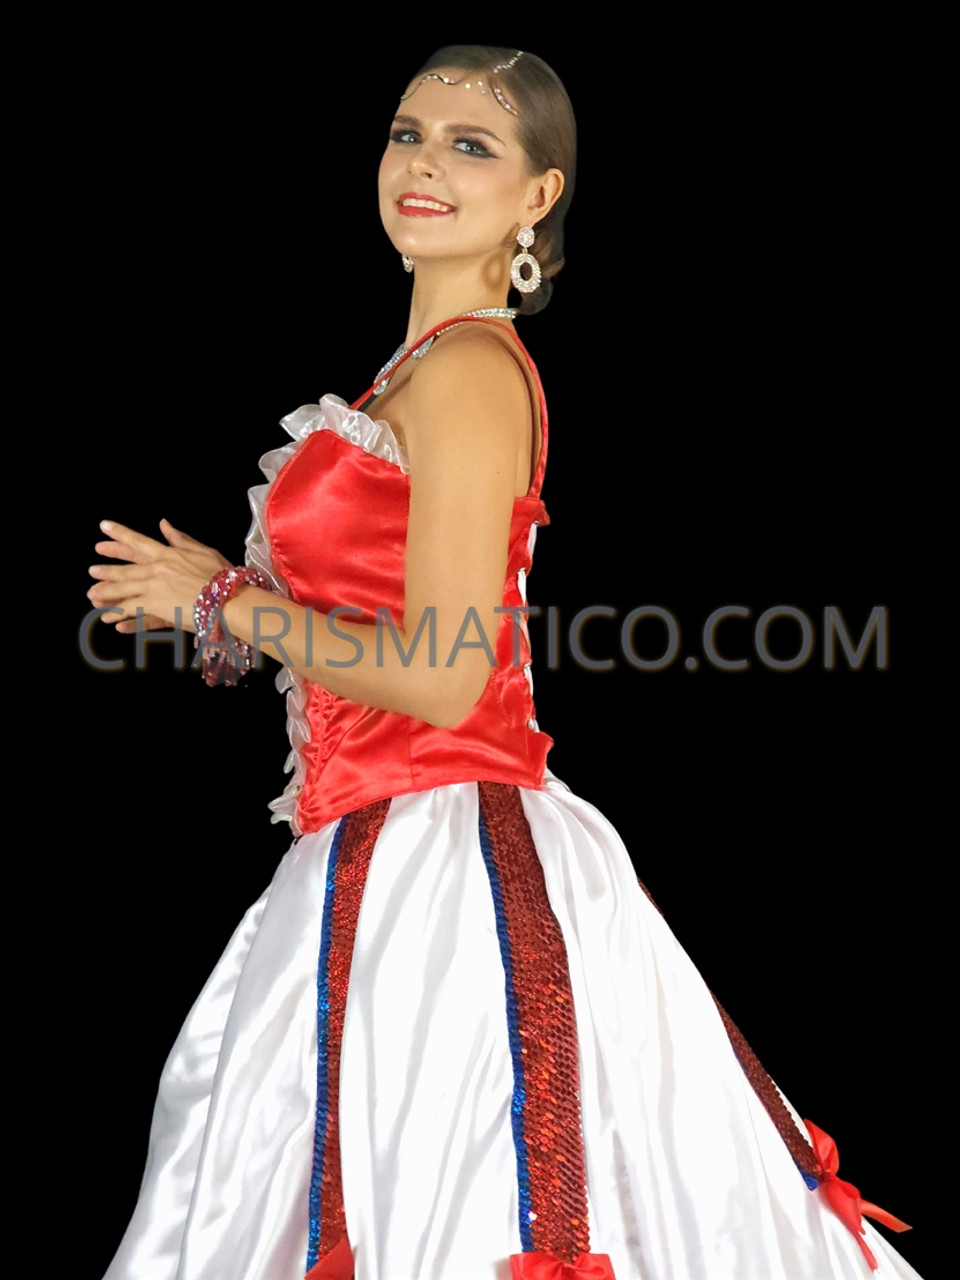 Cancan Costume Red and White Corset with Ruffled Skirt